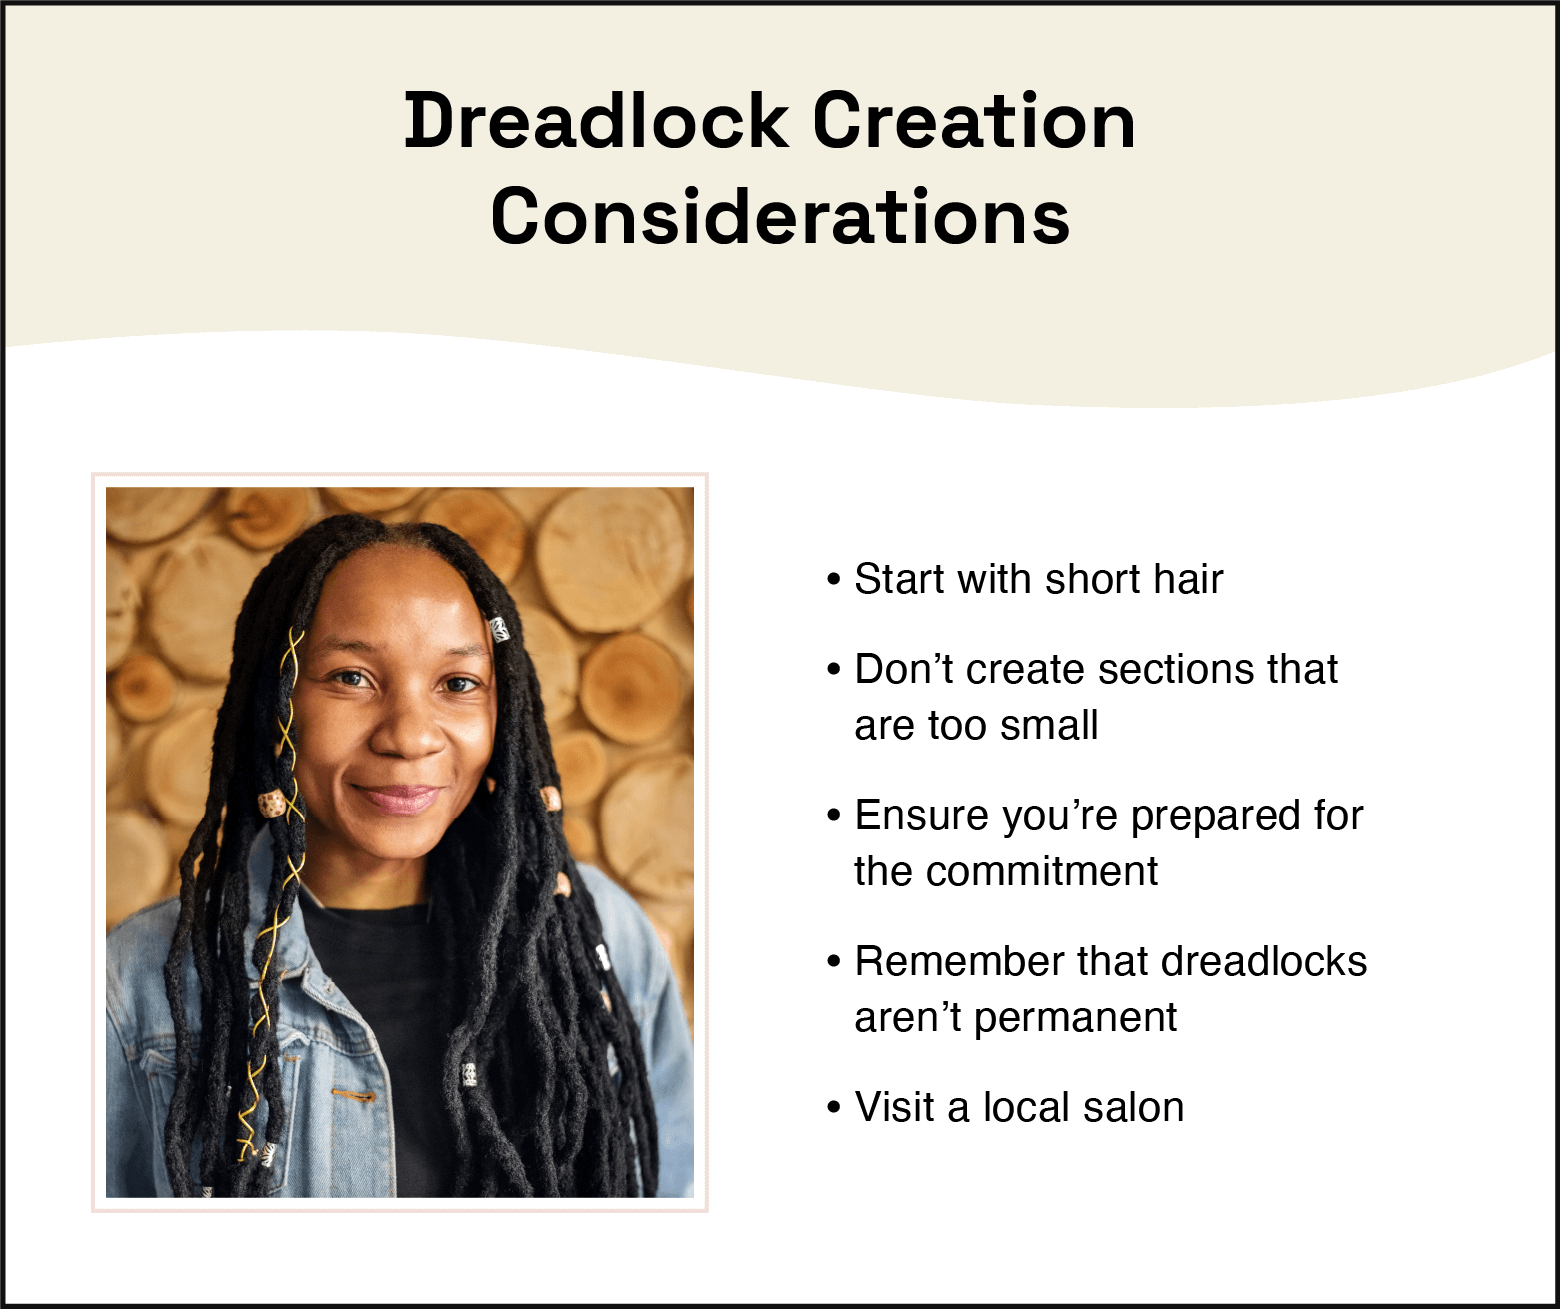 photo on the left of smiling person with accessorized dreadlocks, tips on the right explaining tips for starting dreadlocks